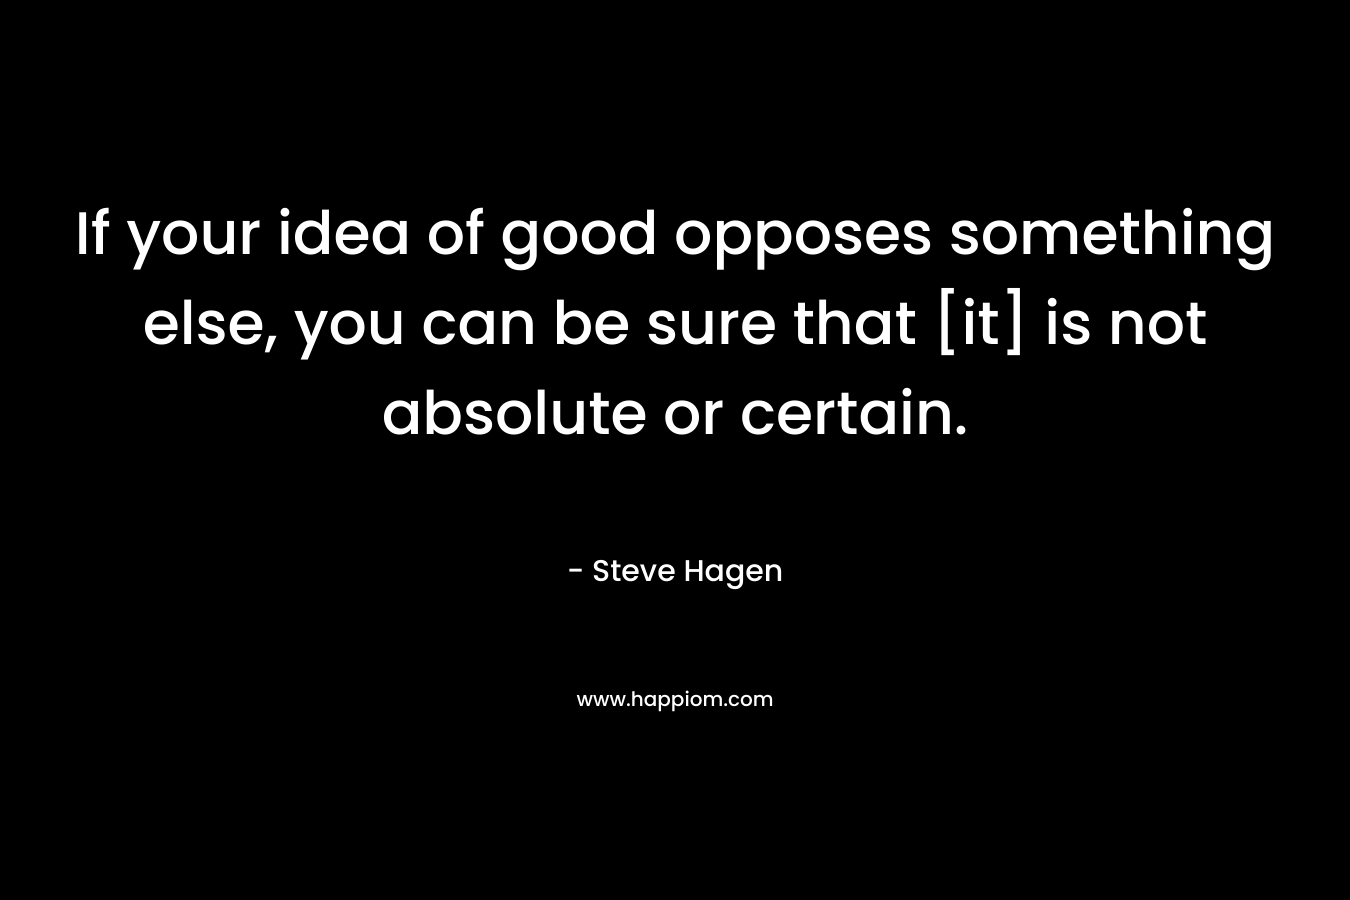 If your idea of good opposes something else, you can be sure that [it] is not absolute or certain. – Steve Hagen